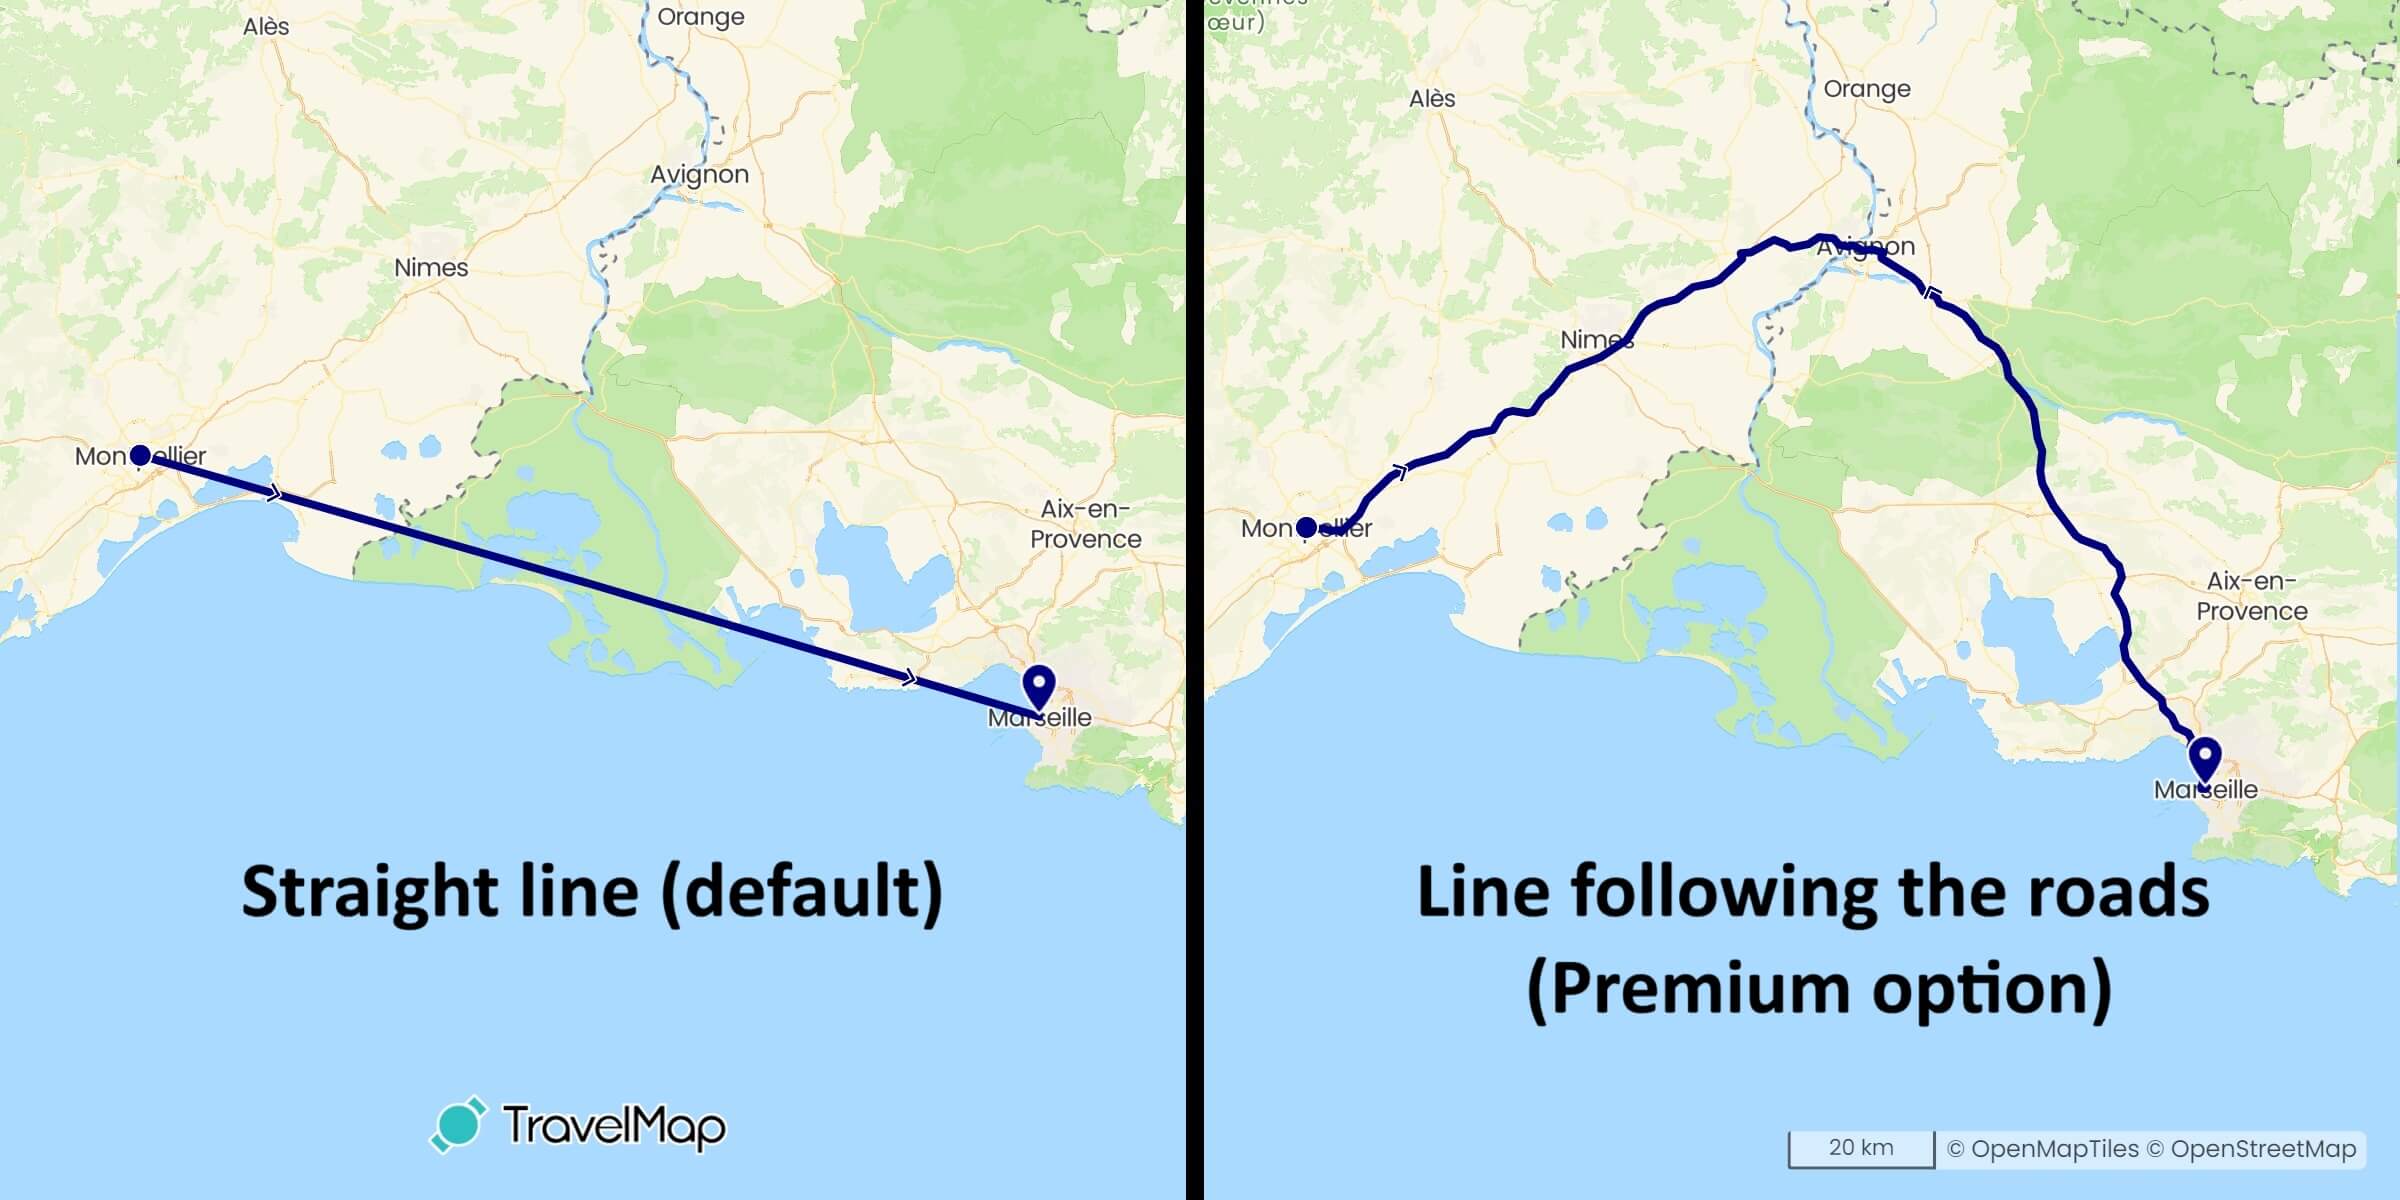 Difference with straight lines and lines following the roads on TravelMap